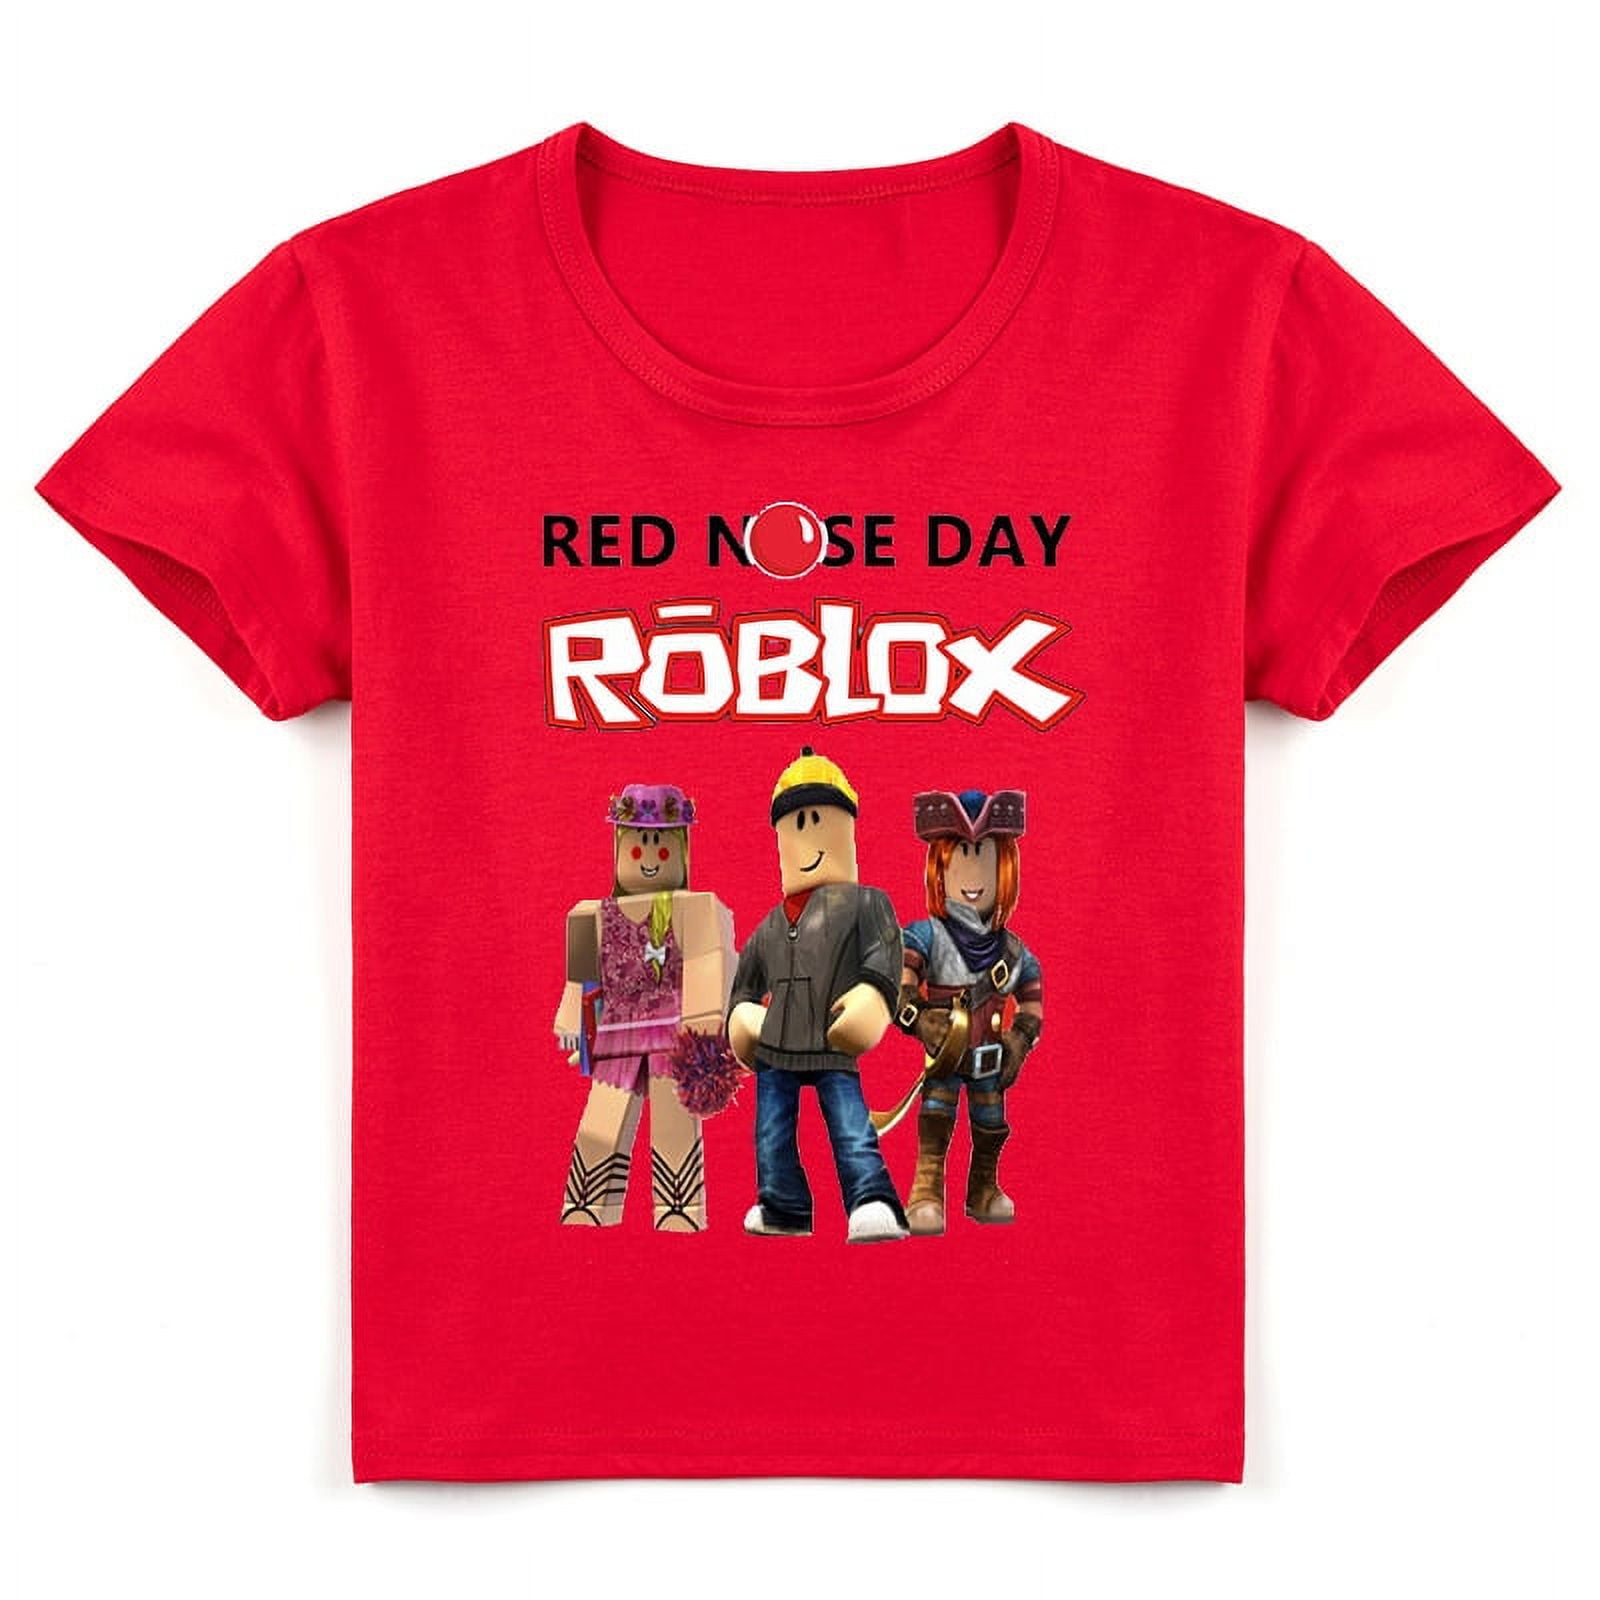 Bzdaisy ROBLOX T-Shirt - Perfect for Gaming Fans - Cool Design and  Comfortable Fit - Boys and Girls Ages 4-11 